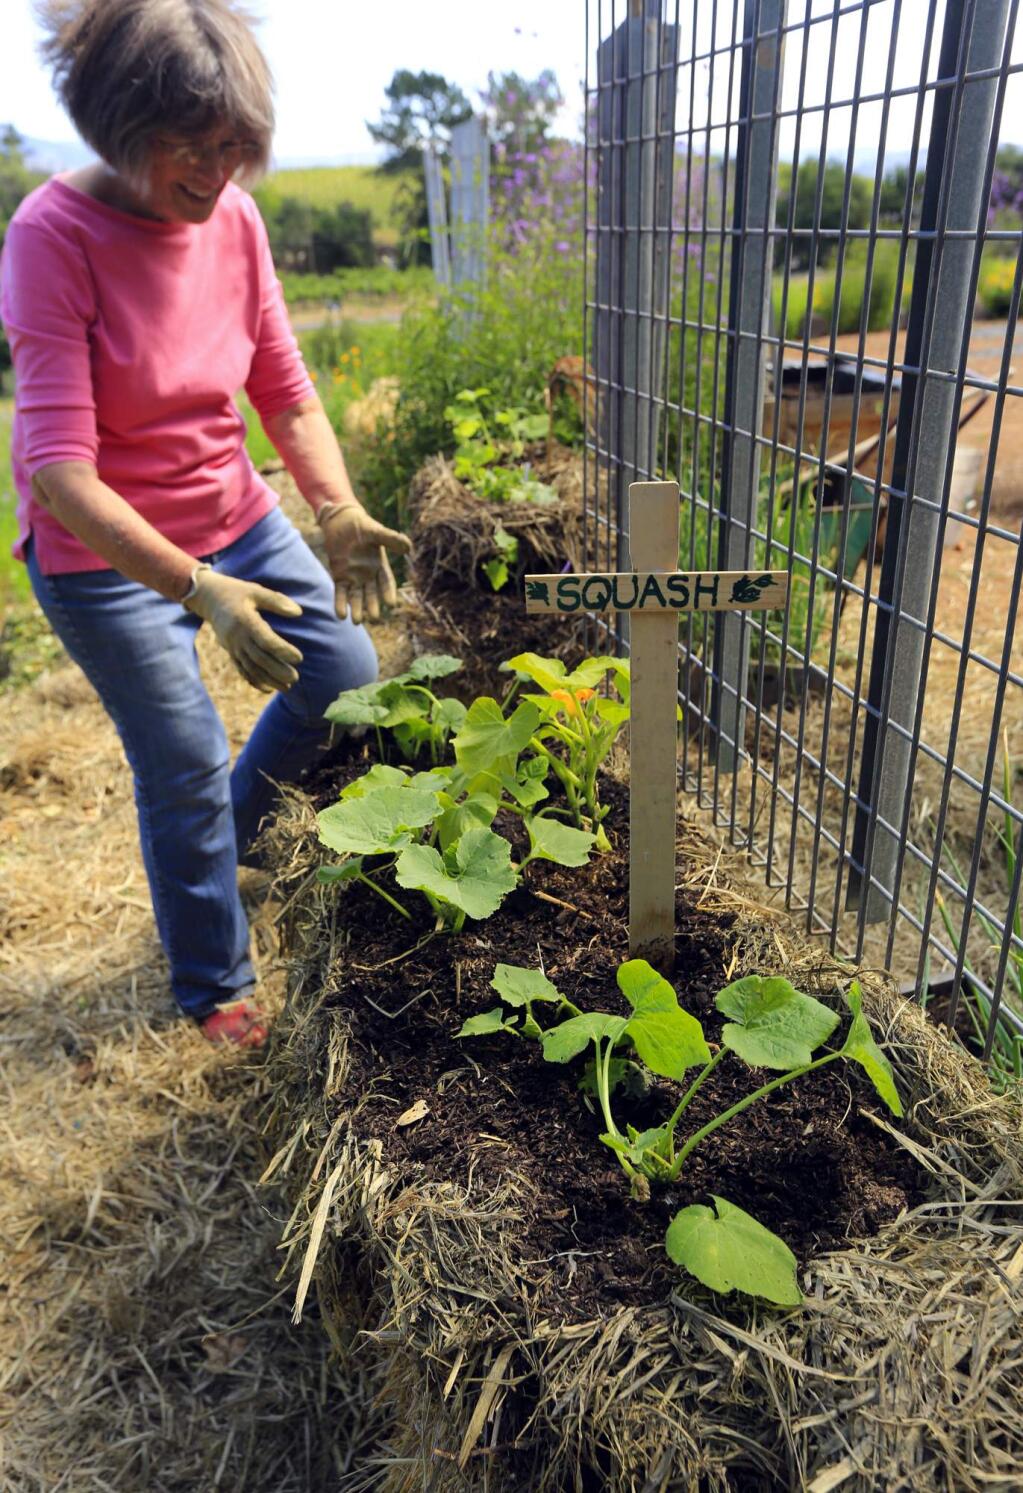 Master gardener Jeanette Clough is experimenting with squash and cucumber planted in straw bales at her Healdsburg area home. (JOHN BURGESS/ PD)